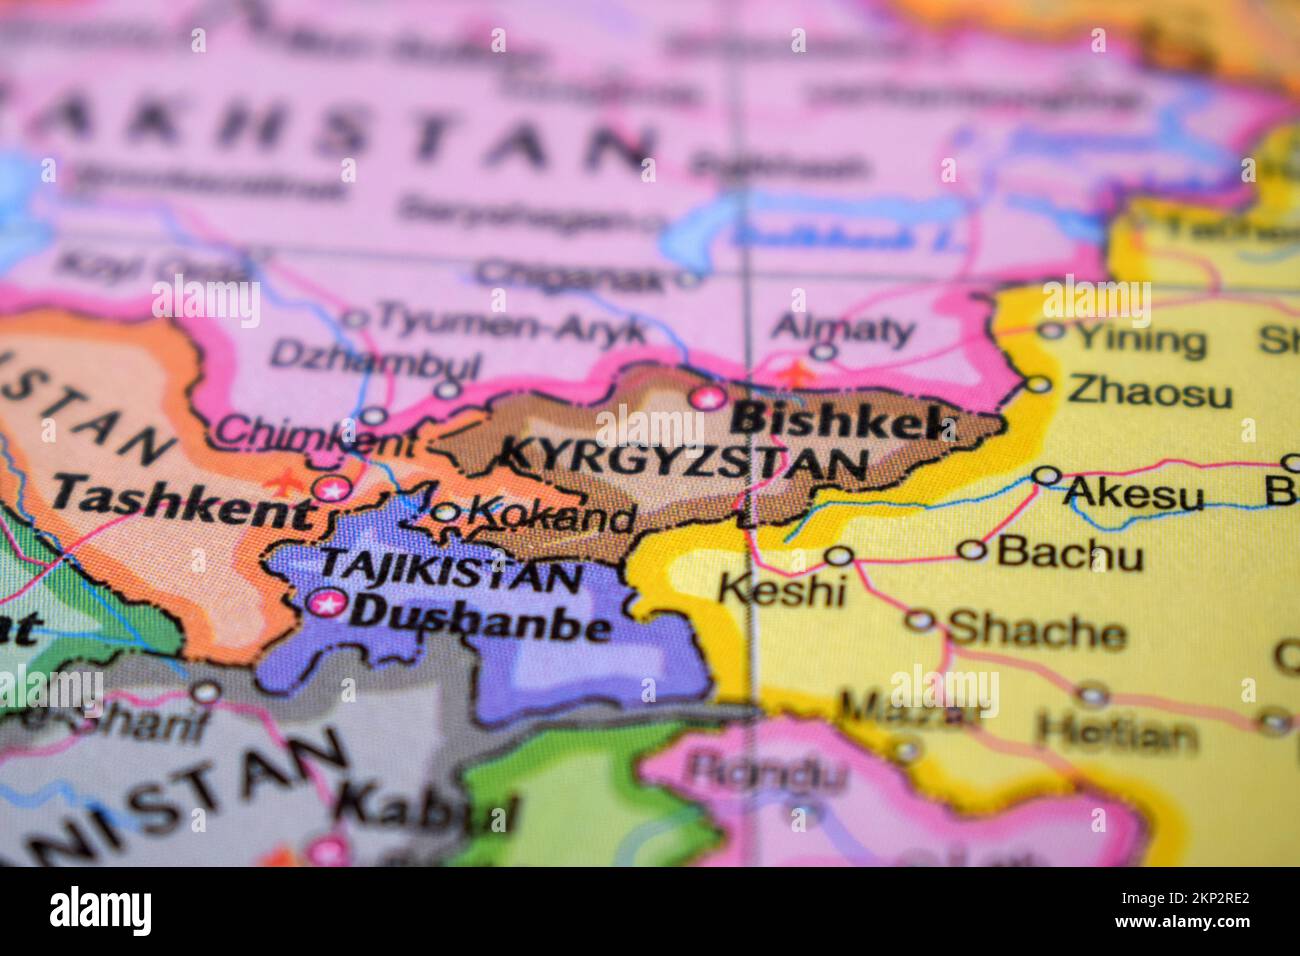 Kyrgyzstan  Travel Concept Country Name On The Political World Map Very Macro Close-Up View Stock Photograph Stock Photo